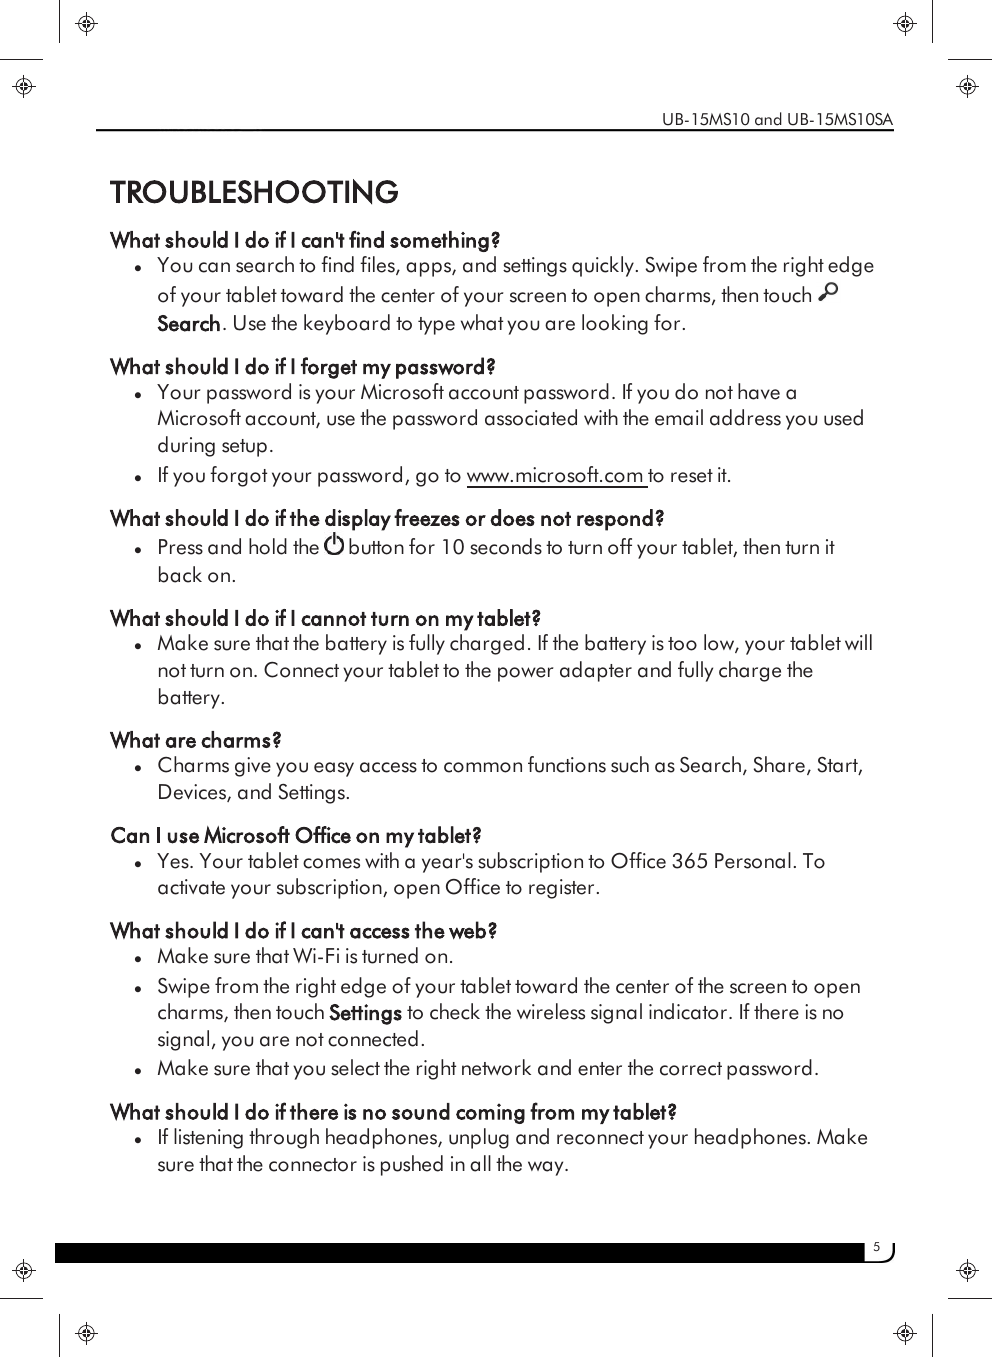 5TROUBLESHOOTINGWhat should I do if I can&apos;t find something?lYou can search to find files, apps, and settings quickly. Swipe from the right edgeof your tablet toward the center of your screen to open charms, then touchSearch. Use the keyboard to type what you are looking for.What should I do if I forget my password?lYour password is your Microsoft account password. If you do not have aMicrosoft account, use the password associated with the email address you usedduring setup.lIf you forgot your password, go to www.microsoft.com to reset it.What should I do if the display freezes or does not respond?lPress and hold the button for 10 seconds to turn off your tablet, then turn itback on.What should I do if I cannot turn on my tablet?lMake sure that the battery is fully charged. If the battery is too low, your tablet willnot turn on. Connect your tablet to the power adapter and fully charge thebattery.What are charms?lCharms give you easy access to common functions such as Search, Share, Start,Devices, and Settings.Can I use Microsoft Office on my tablet?lYes. Your tablet comes with a year&apos;s subscription to Office 365 Personal. Toactivate your subscription, open Office to register.What should I do if I can&apos;t access the web?lMake sure that Wi-Fi is turned on.lSwipe from the right edge of your tablet toward the center of the screen to opencharms, then touch Settings to check the wireless signal indicator. If there is nosignal, you are not connected.lMake sure that you select the right network and enter the correct password.What should I do if there is no sound coming from my tablet?lIf listening through headphones, unplug and reconnect your headphones. Makesure that the connector is pushed in all the way.UB-15MS10 and UB-15MS10SA